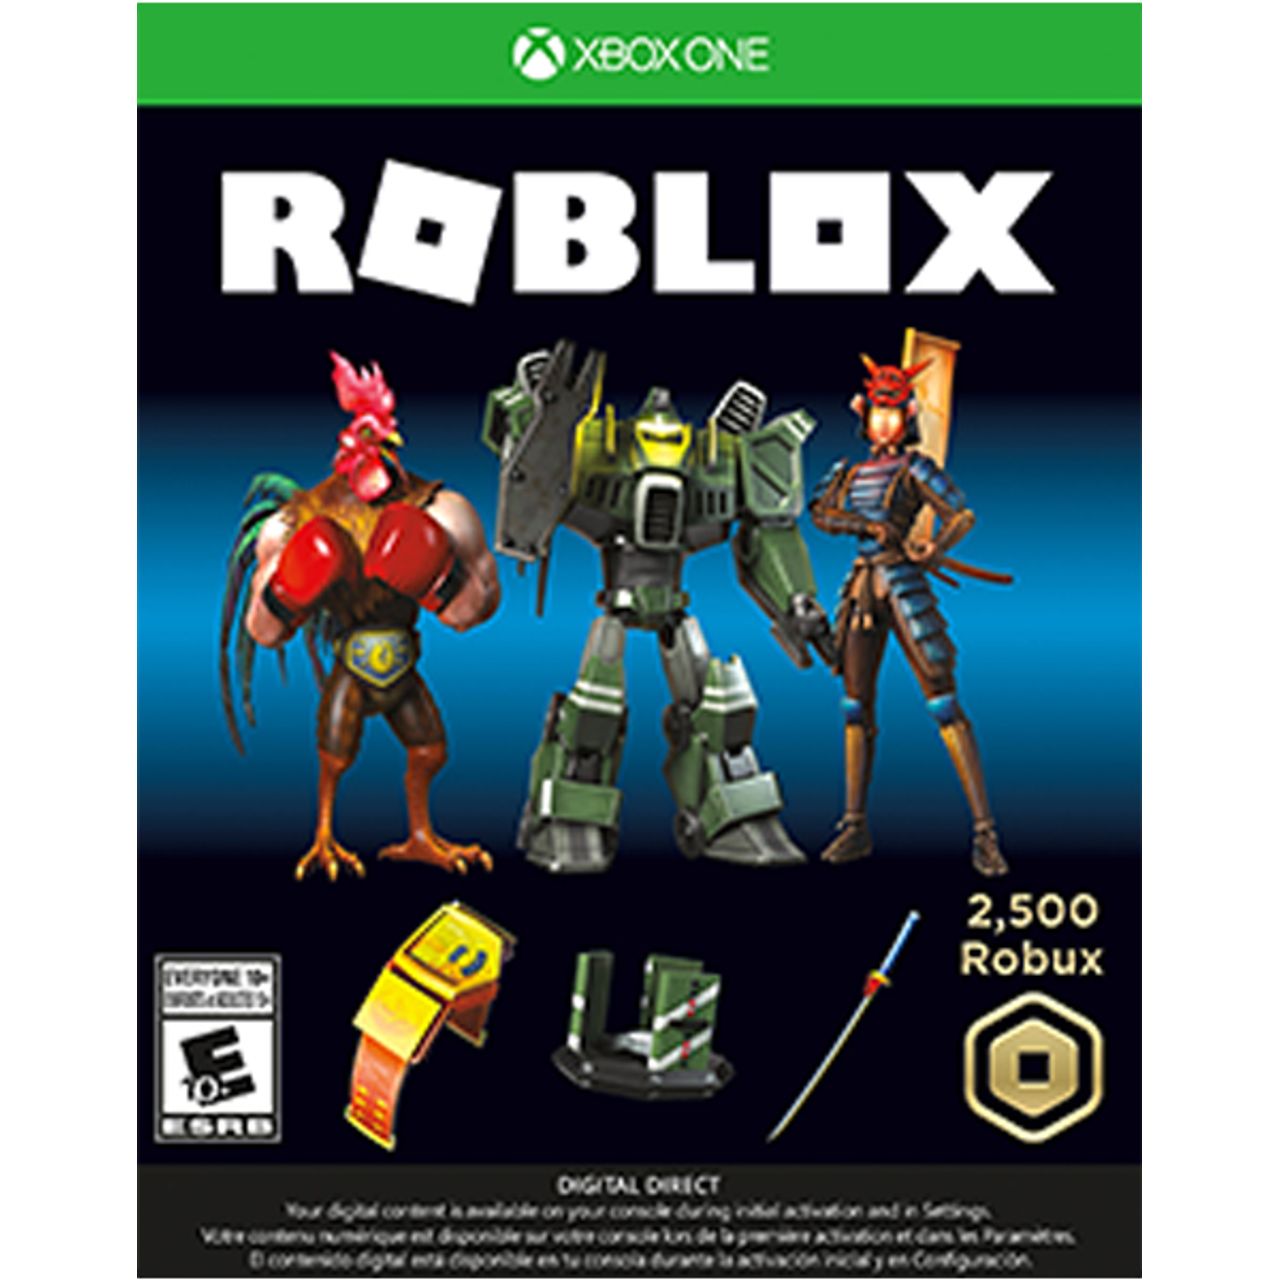 How To Play Roblox On Pc With Xbox One Controller لم يسبق له مثيل